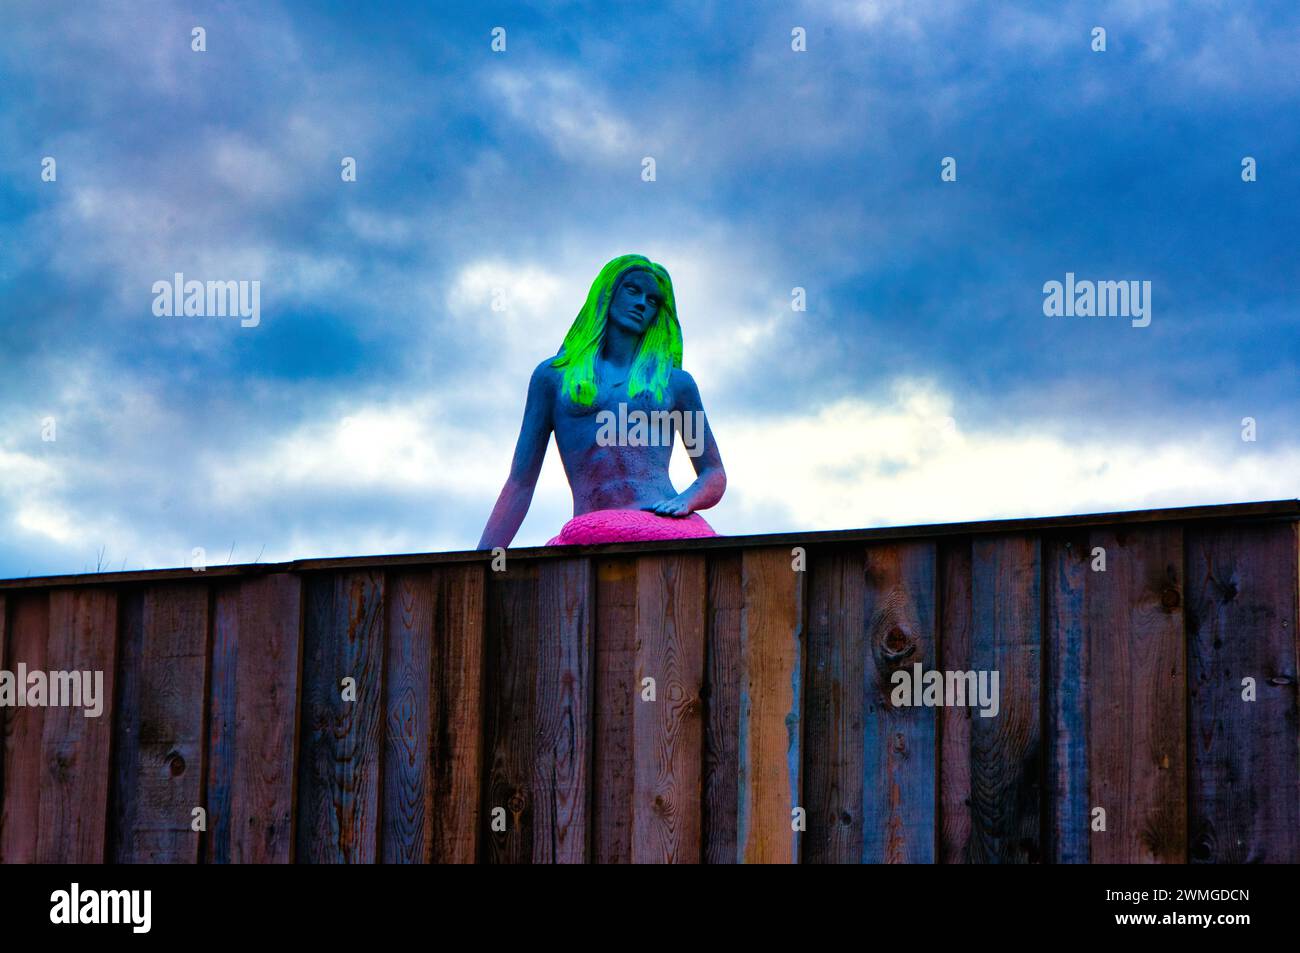 A sculpture of a woman with vibrant green hair under a cloudy sky in Jois, Austria Stock Photo